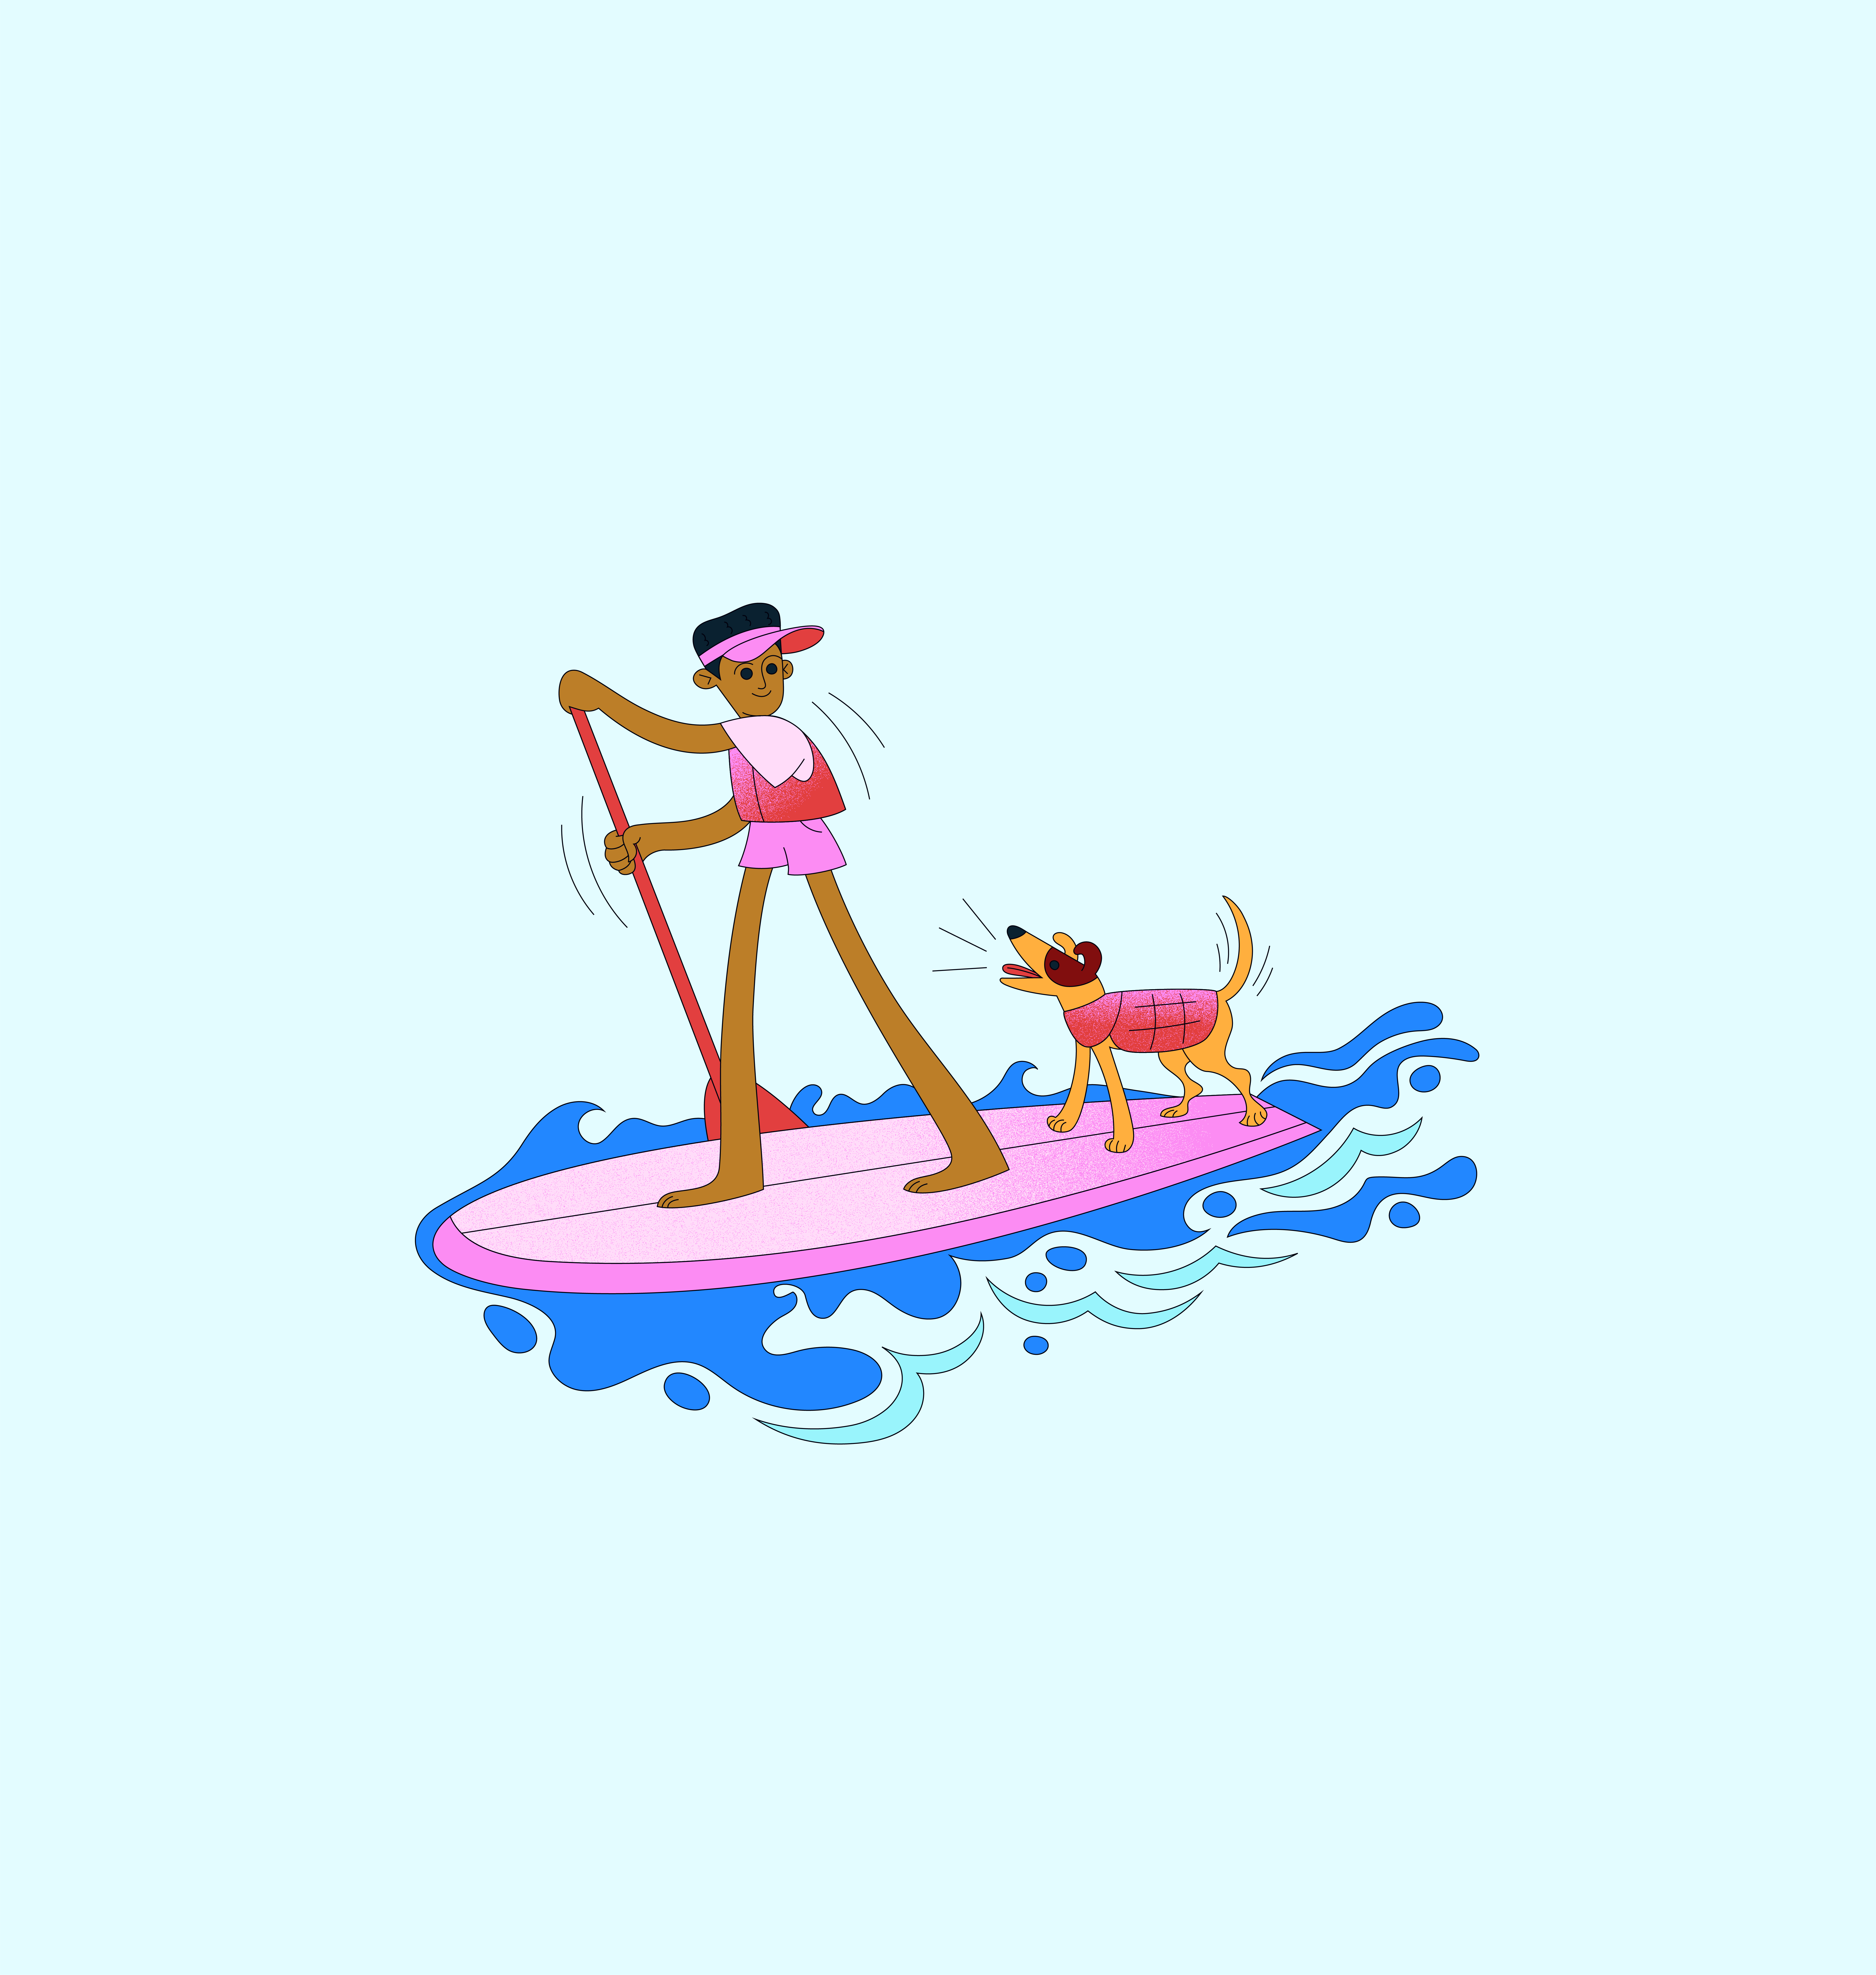 Illustration by Mayara Lista of a person stand up paddle boarding with a dog.